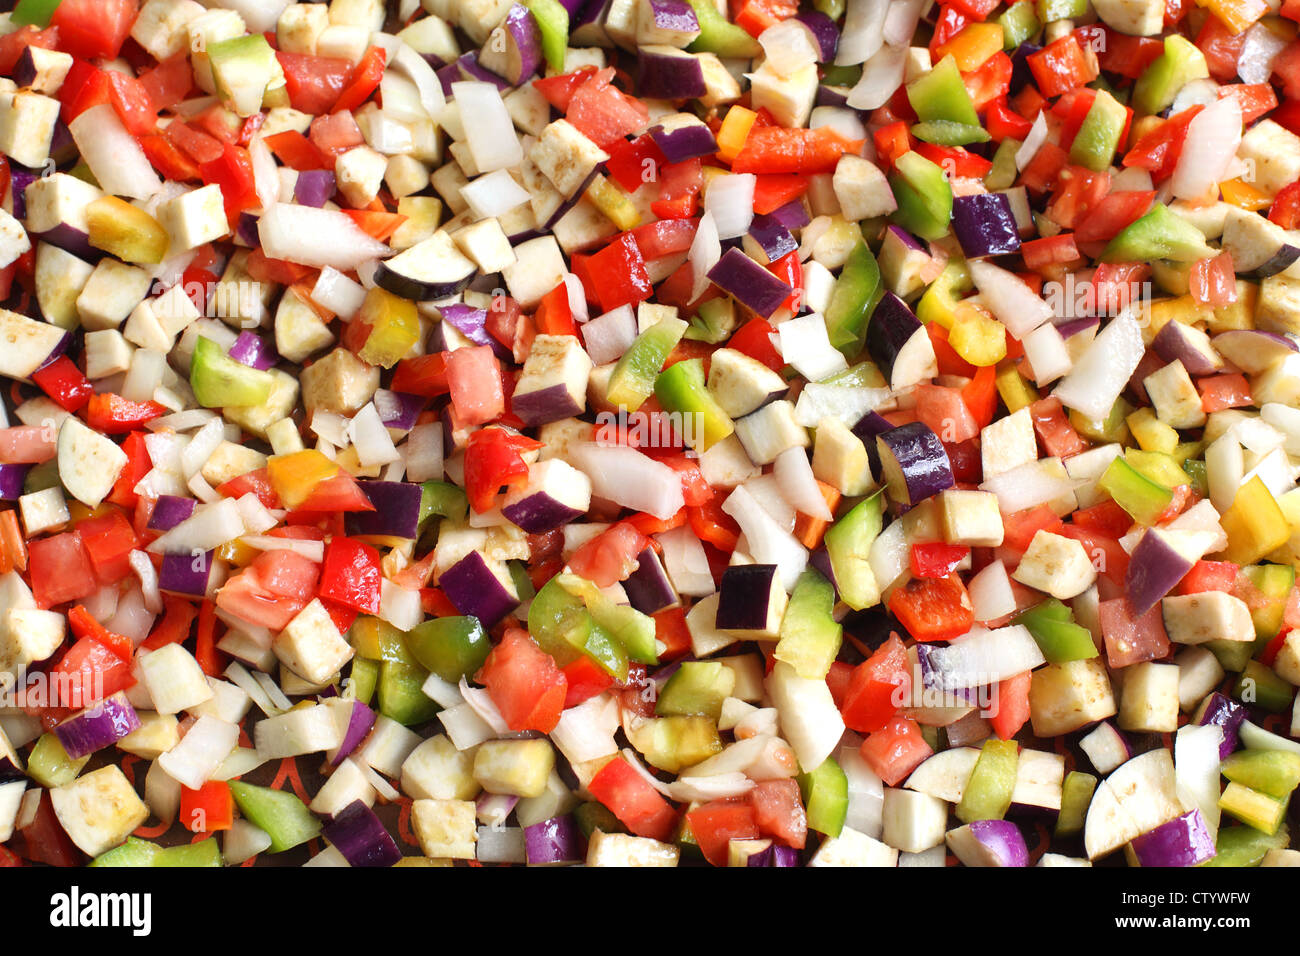 Chopped vegetables. Eggplant, peppers, onions, tomatoes. Stock Photo